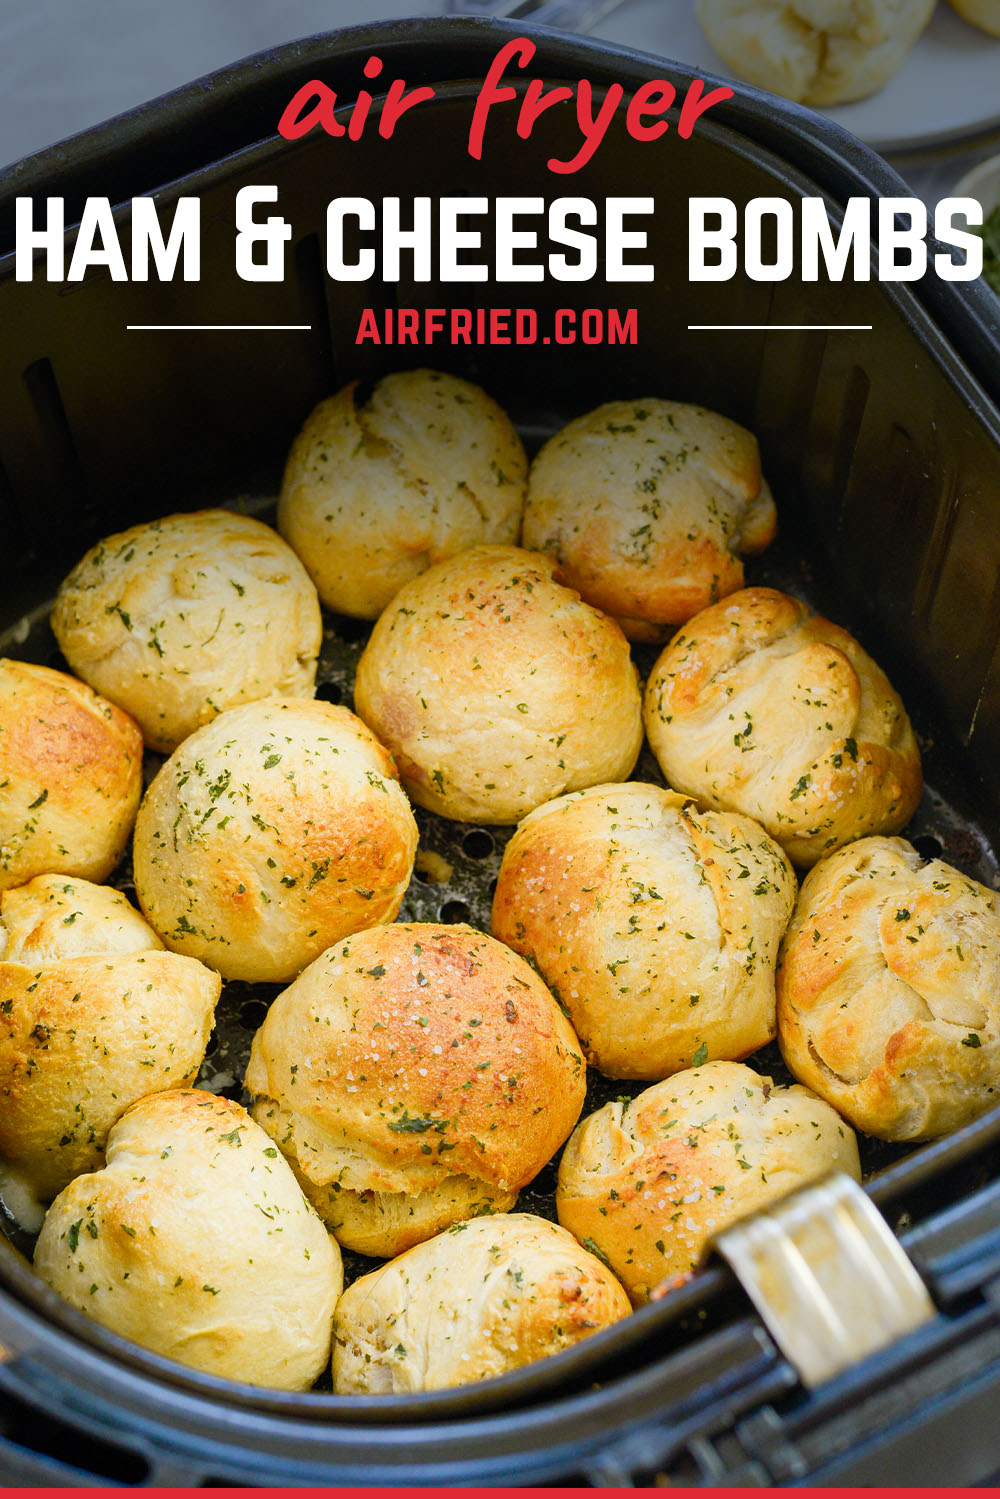 I love these air fried ham and cheese bombs.  They have a perfect center, a fluffy shell, and they were easy to make!